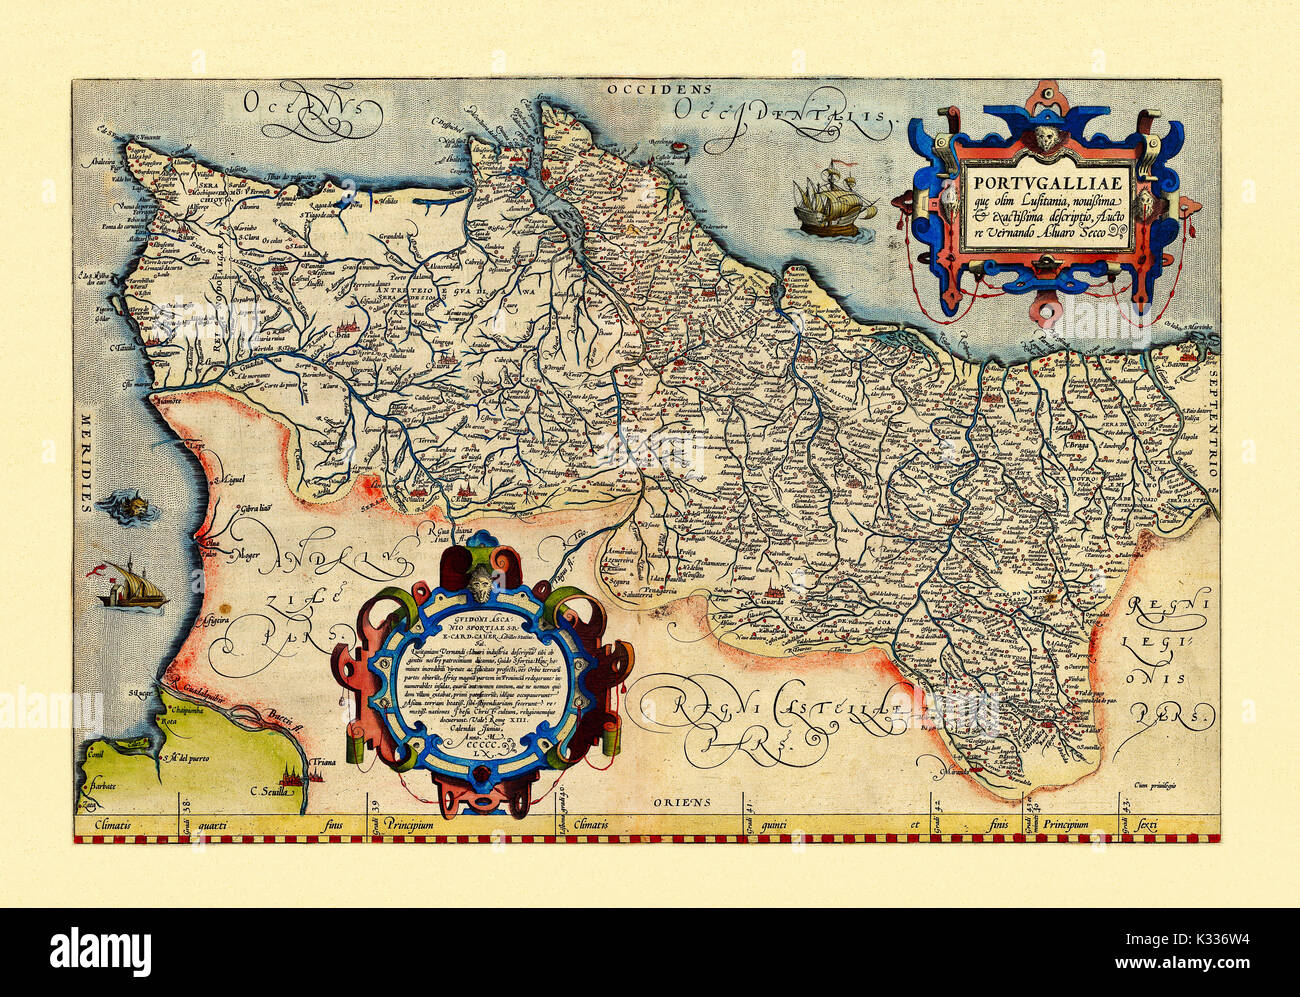 Old map of Portugal  in excellent state of preservation. By Ortelius, Theatrum Orbis Terrarum, Antwerp, 1570 Stock Photo